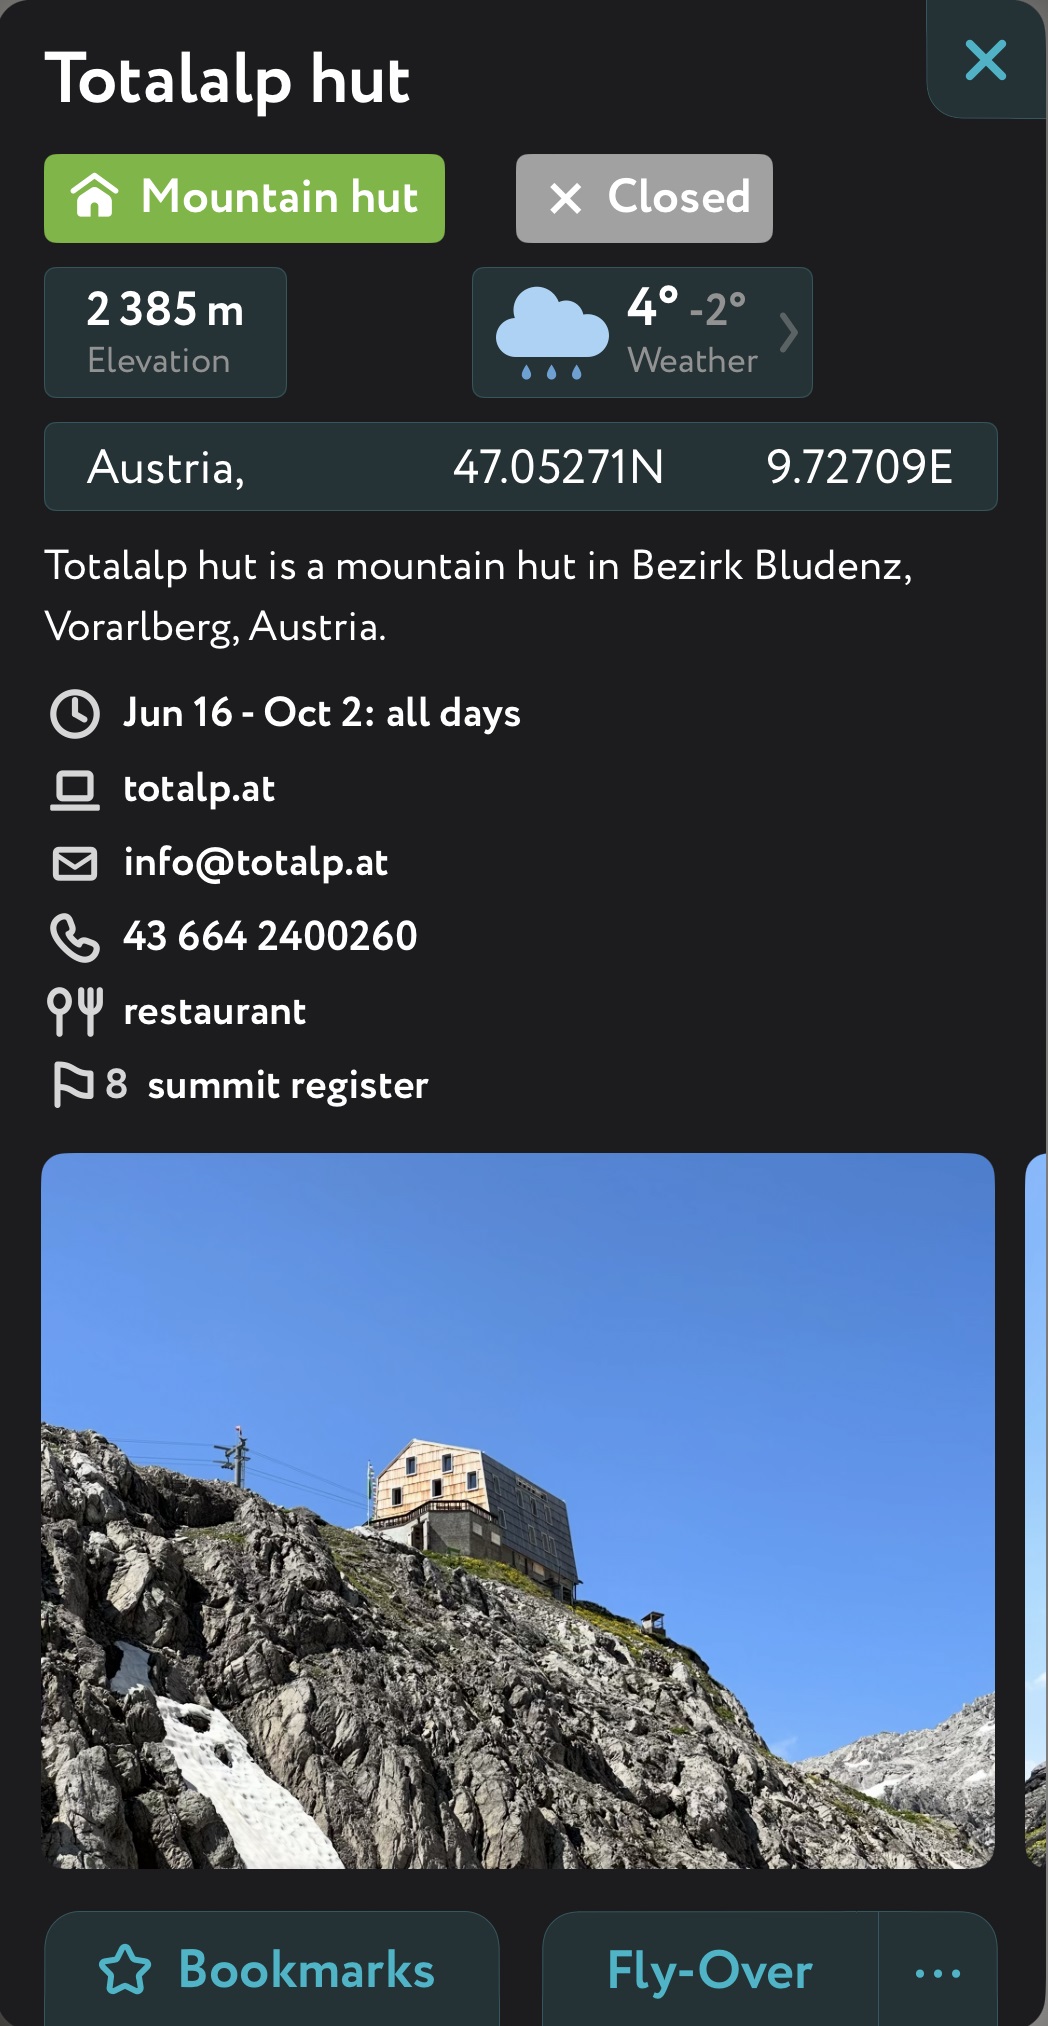 The PeakVisor App information panel for everything you need to know about the Totalphütte. Climbing Schesaplana